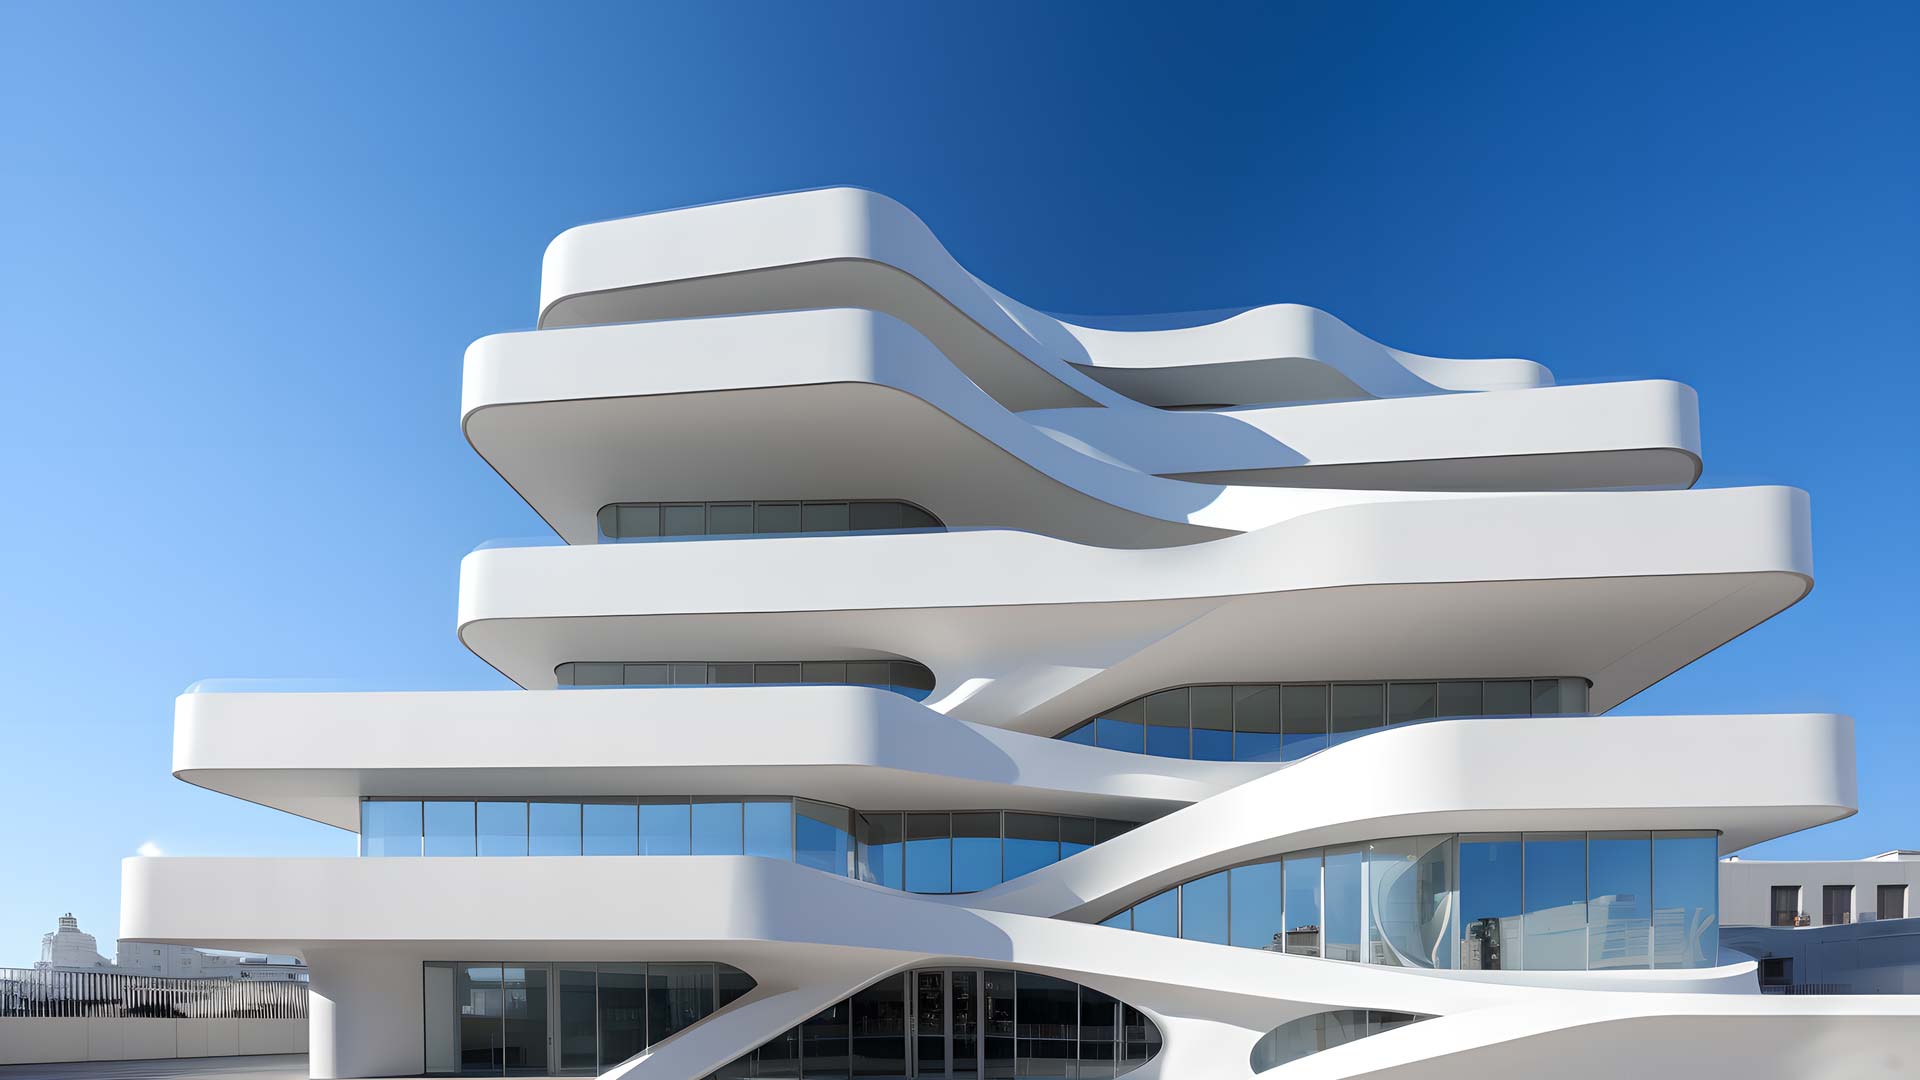 Sculptural architecture, inspiration and creativity